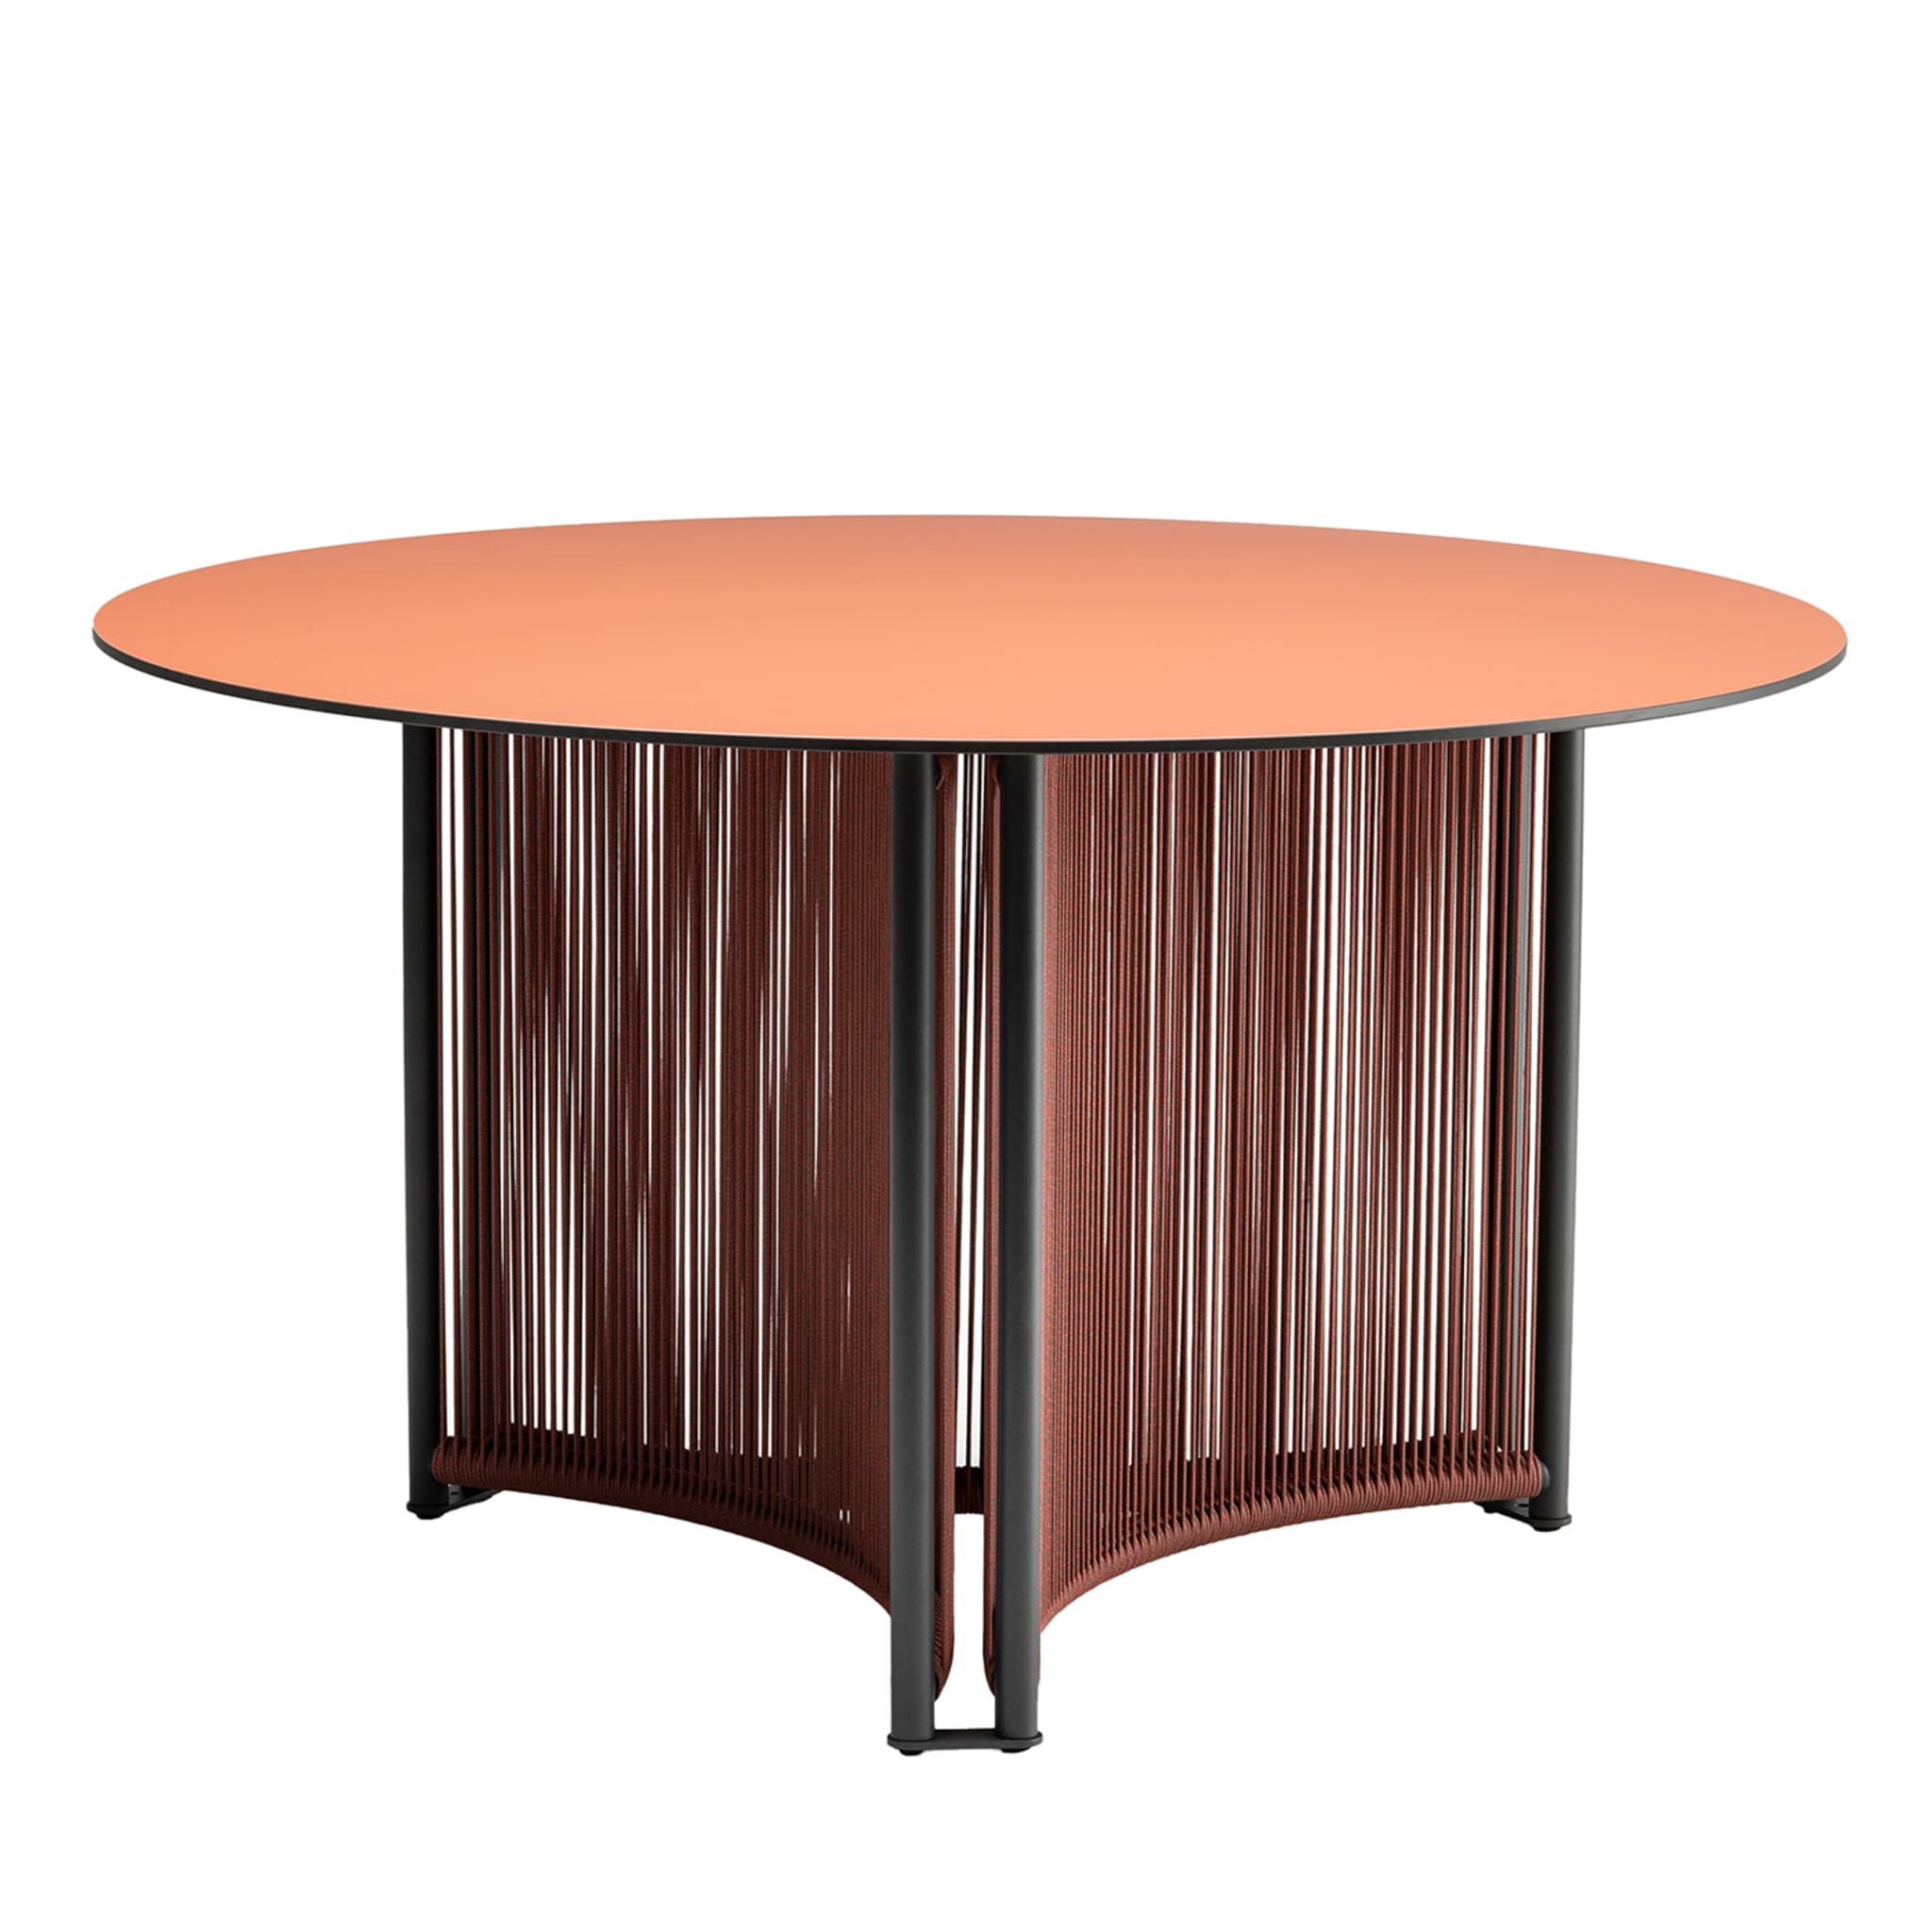 Altana T-RO Round Brick-Red Table by Antonio De Marco - Main view